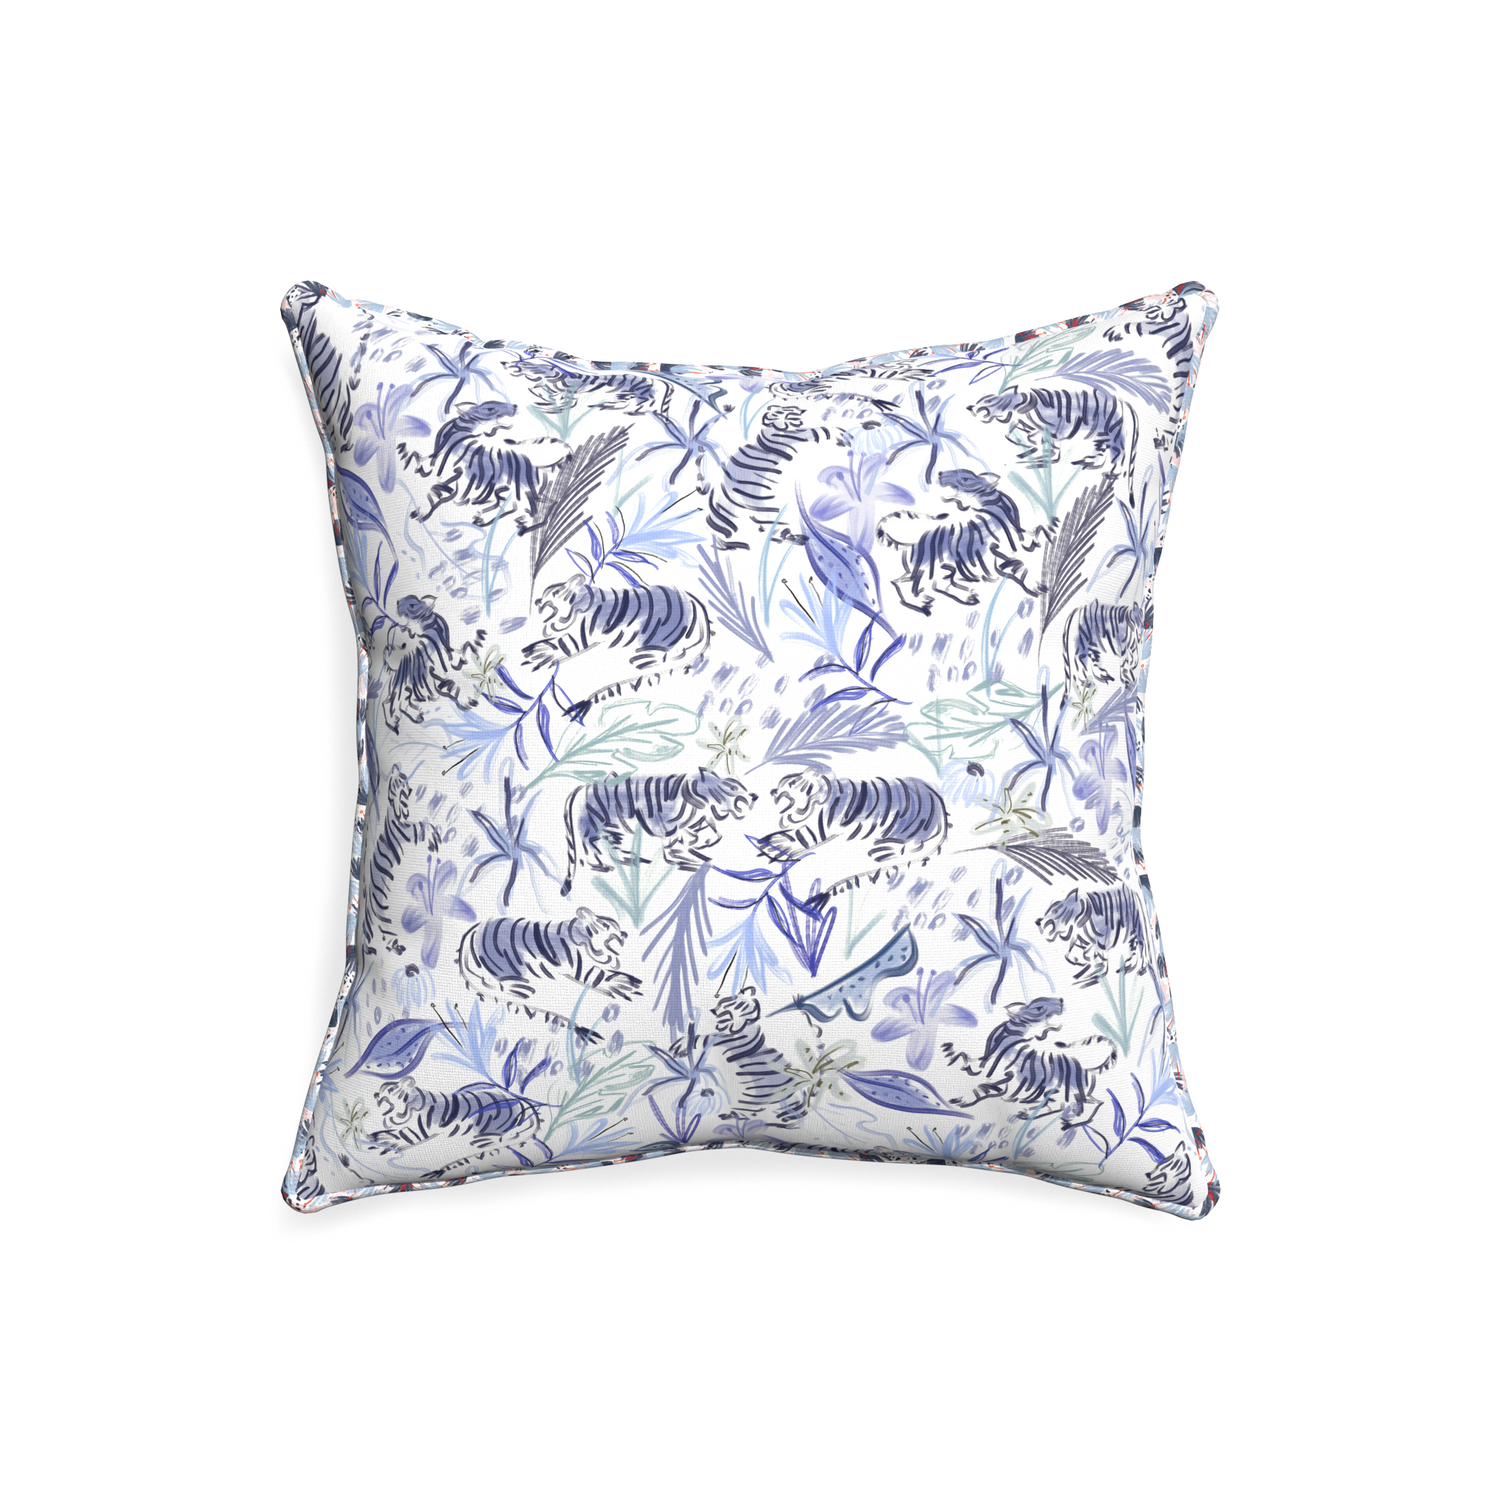 20-square frida blue custom blue with intricate tiger designpillow with e piping on white background